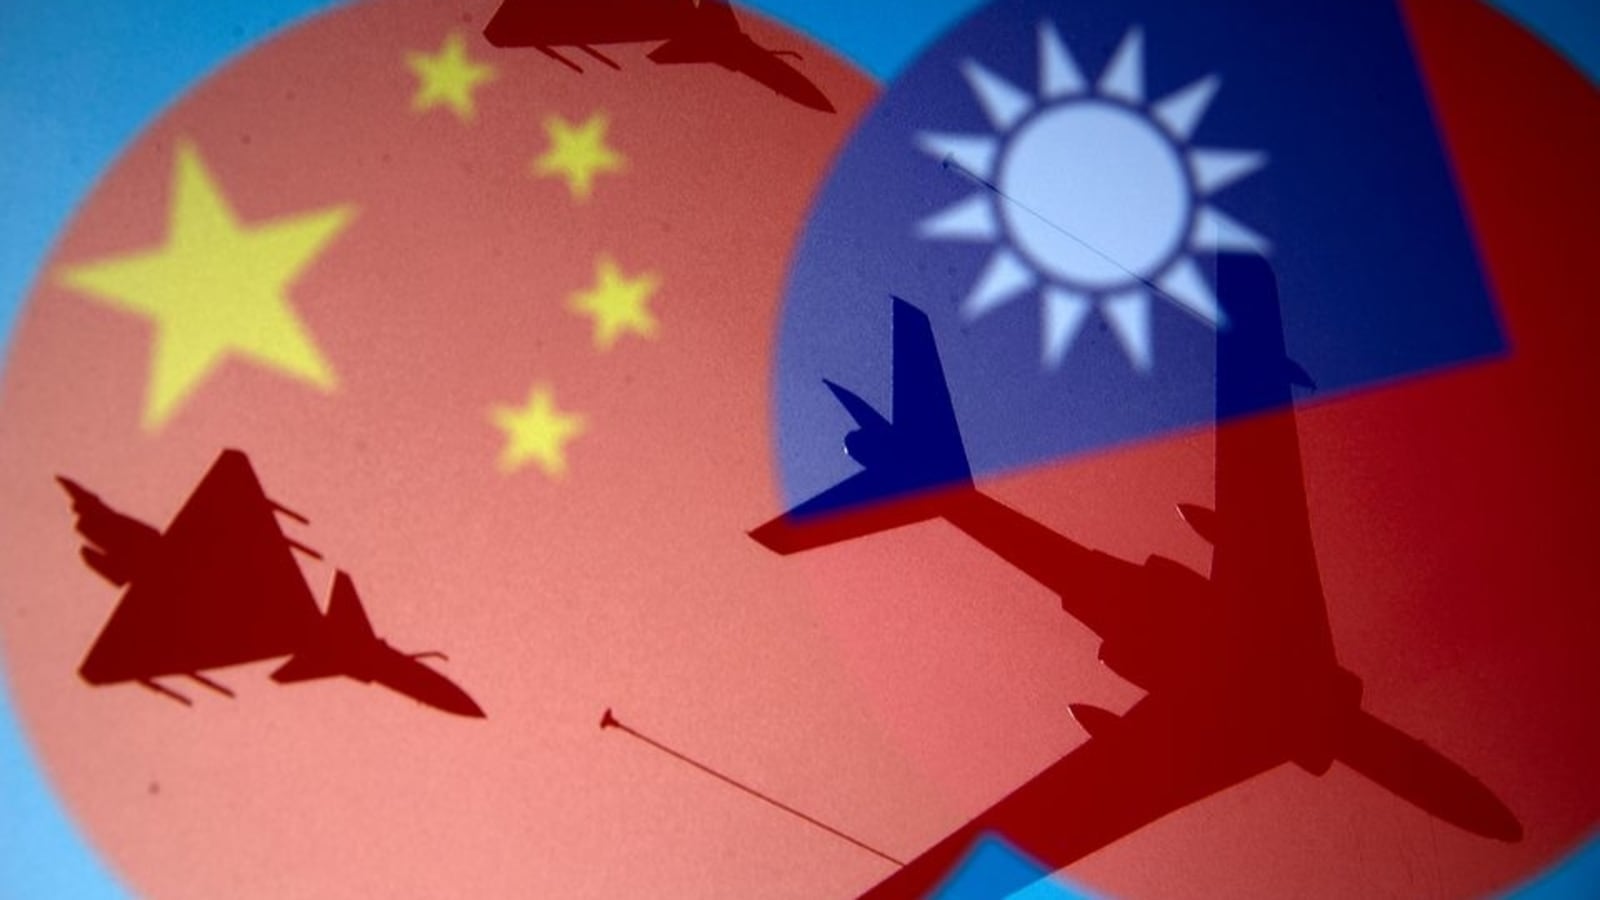 Breezy Explainer: Can China invade Taiwan?